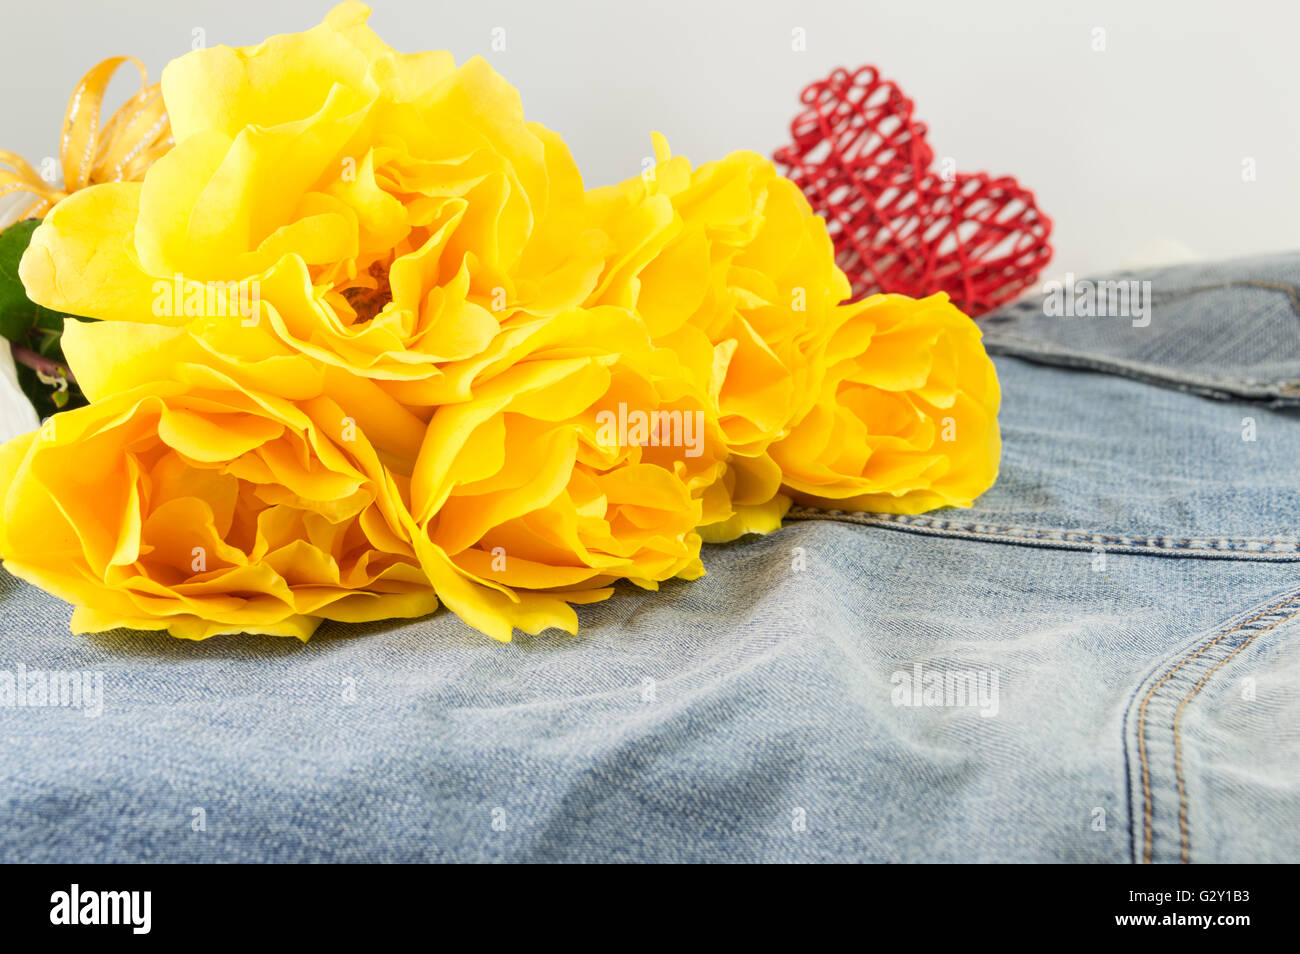 Yellow roses in full blossom placed on denim jeans Stock Photo